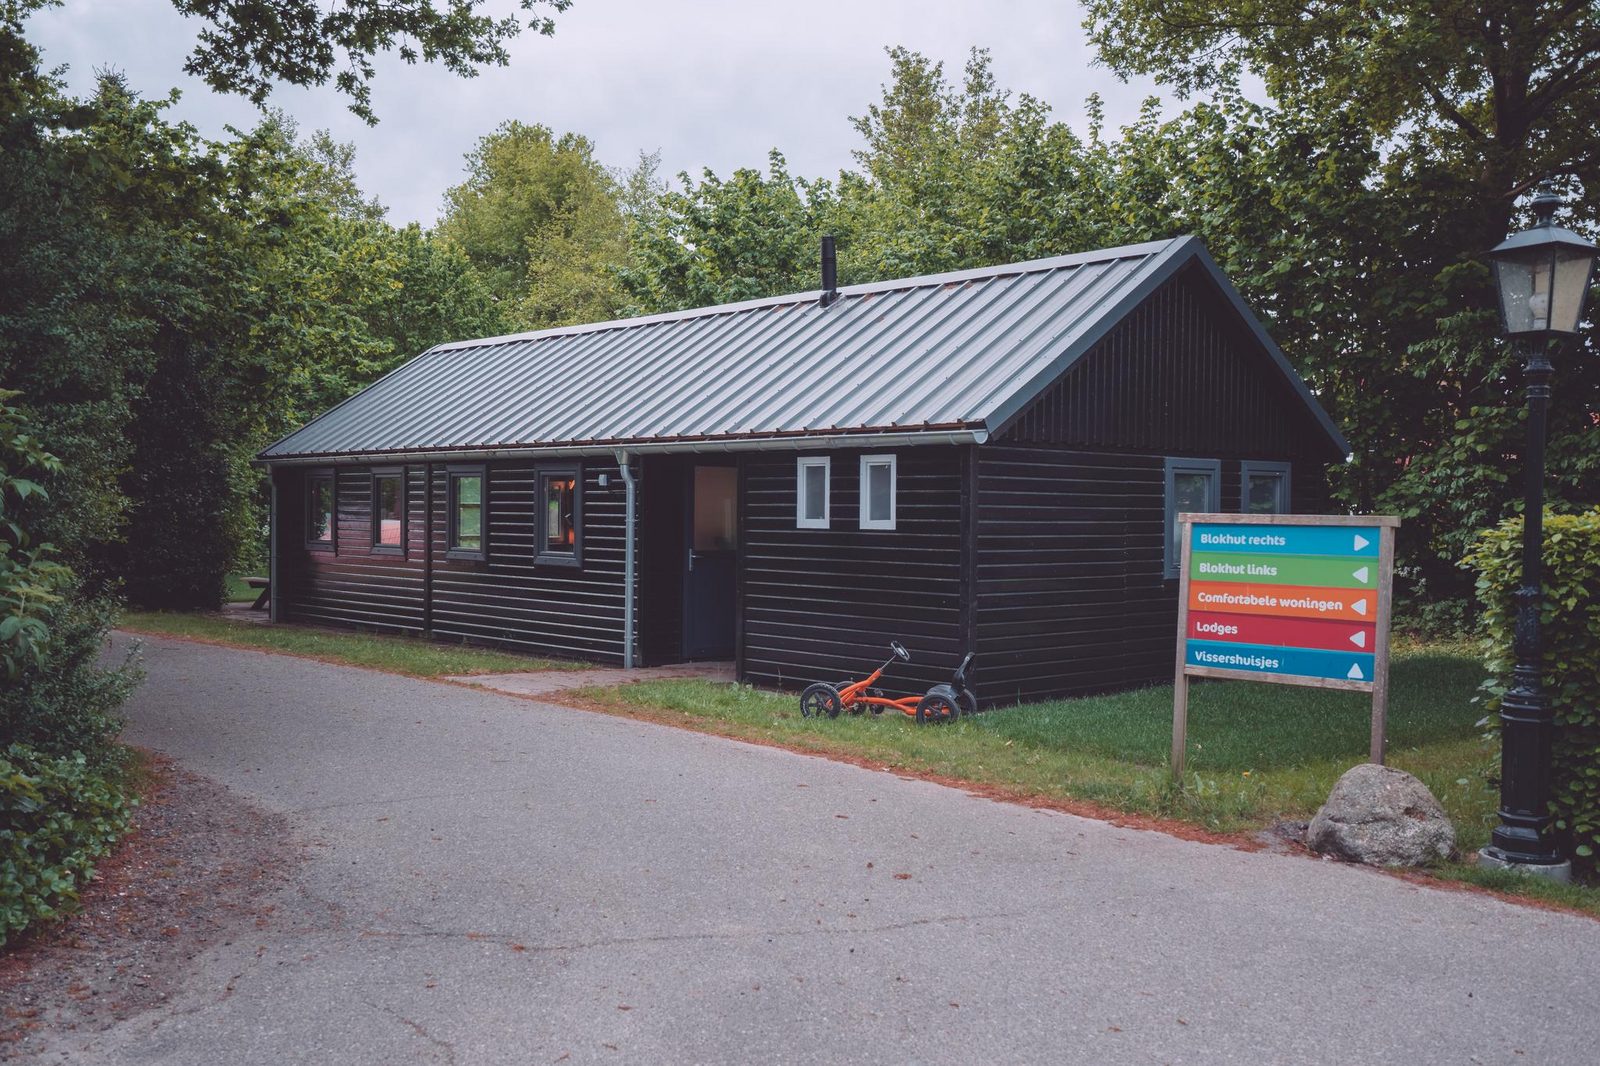 Group accommodation: combination of all holiday park accommodation options (230 people)